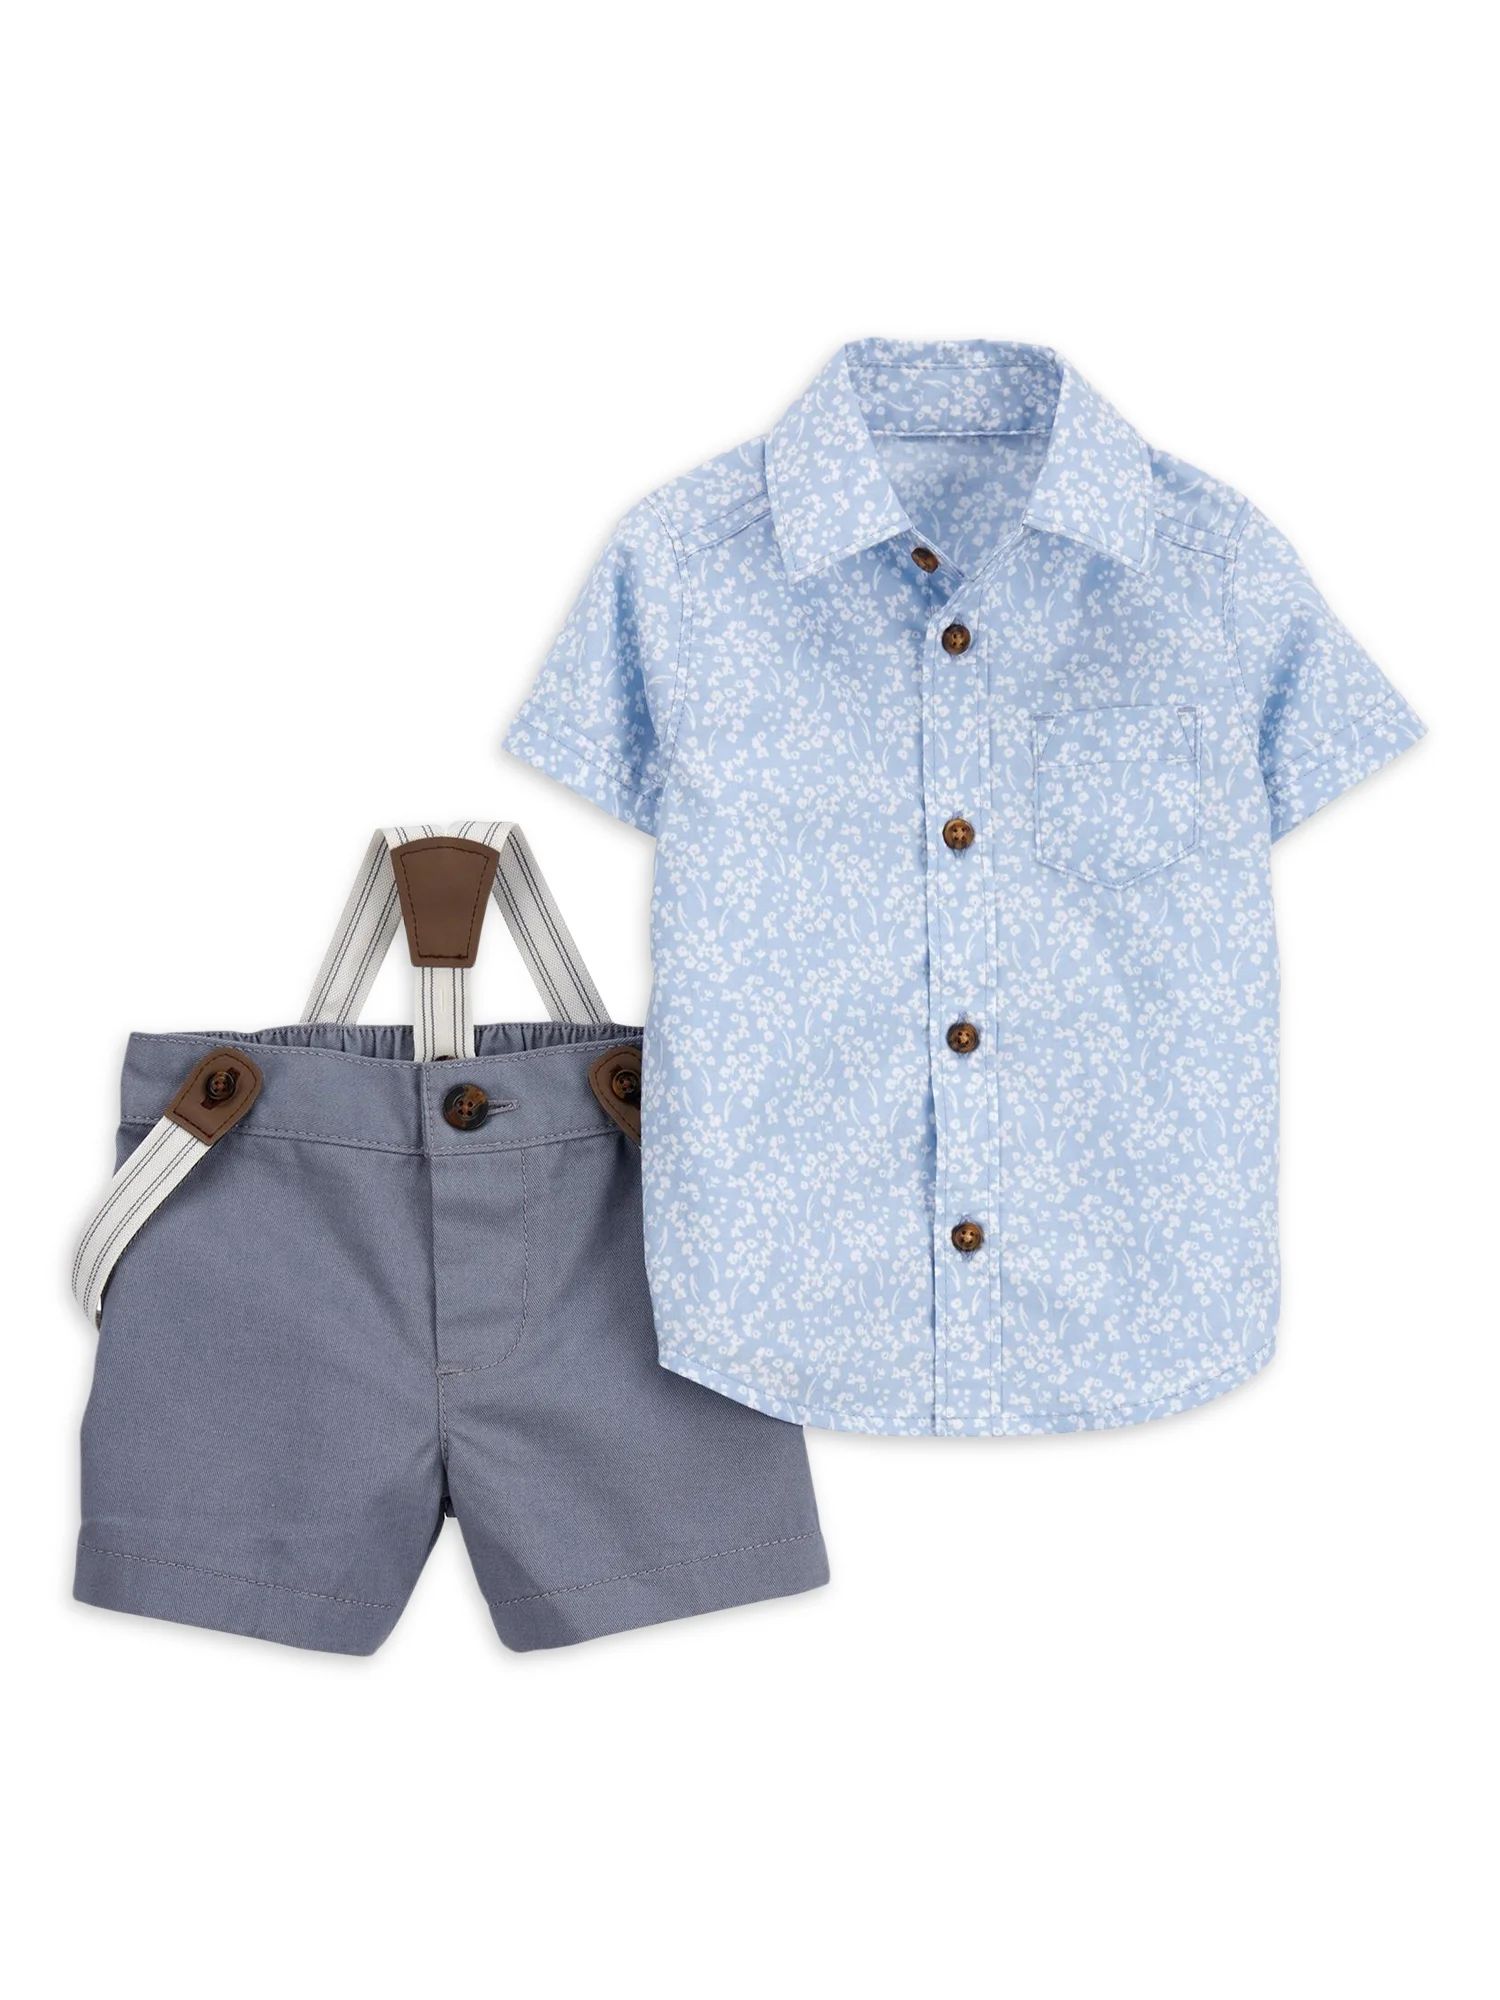 Carter's Child of Mine Baby Boy Shorts Outfit Set, 2-Piece, Sizes 0/3-24 Months | Walmart (US)